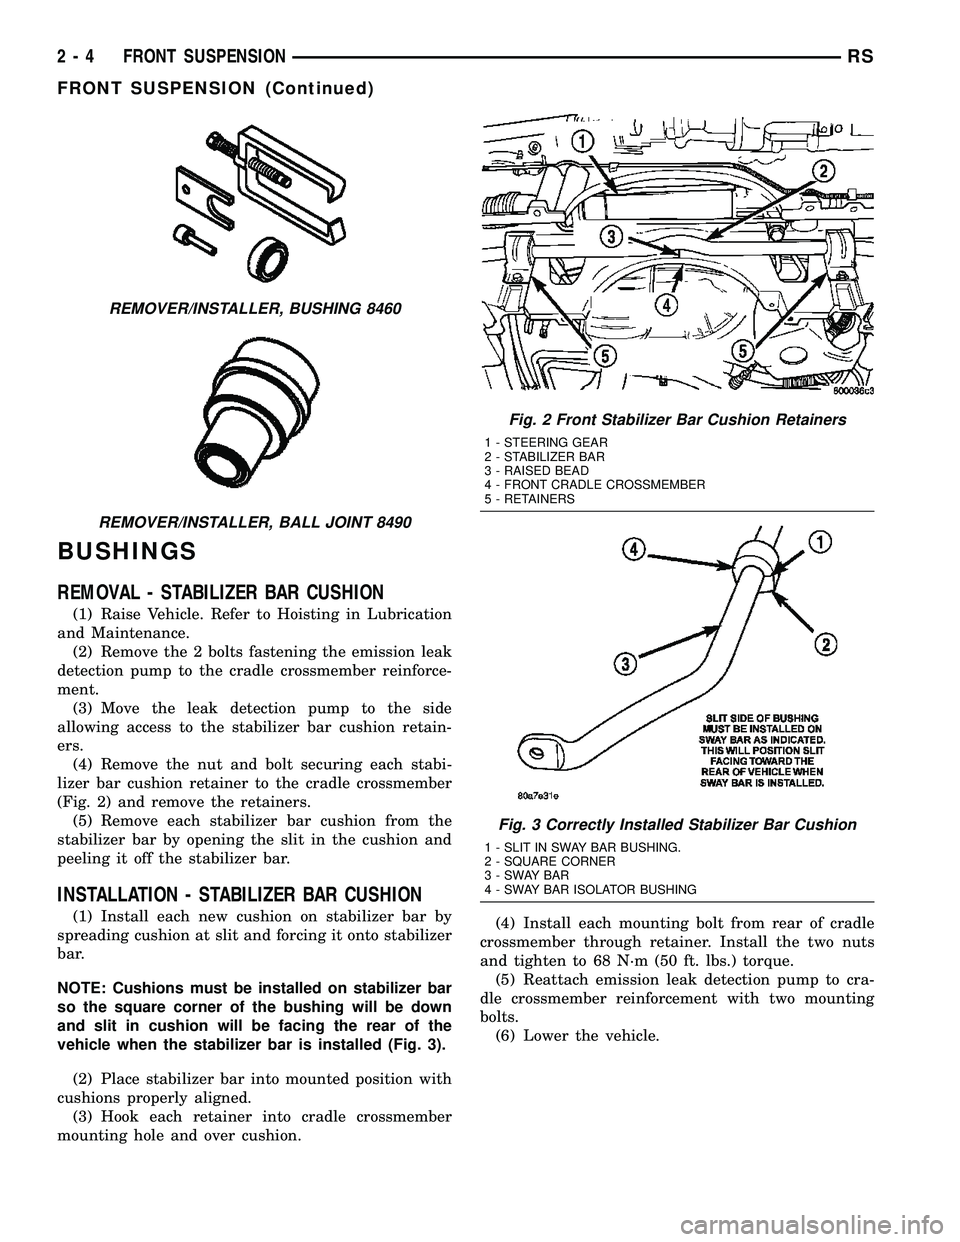 CHRYSLER VOYAGER 2005  Service Manual BUSHINGS
REMOVAL - STABILIZER BAR CUSHION
(1) Raise Vehicle. Refer to Hoisting in Lubrication
and Maintenance.
(2) Remove the 2 bolts fastening the emission leak
detection pump to the cradle crossmemb